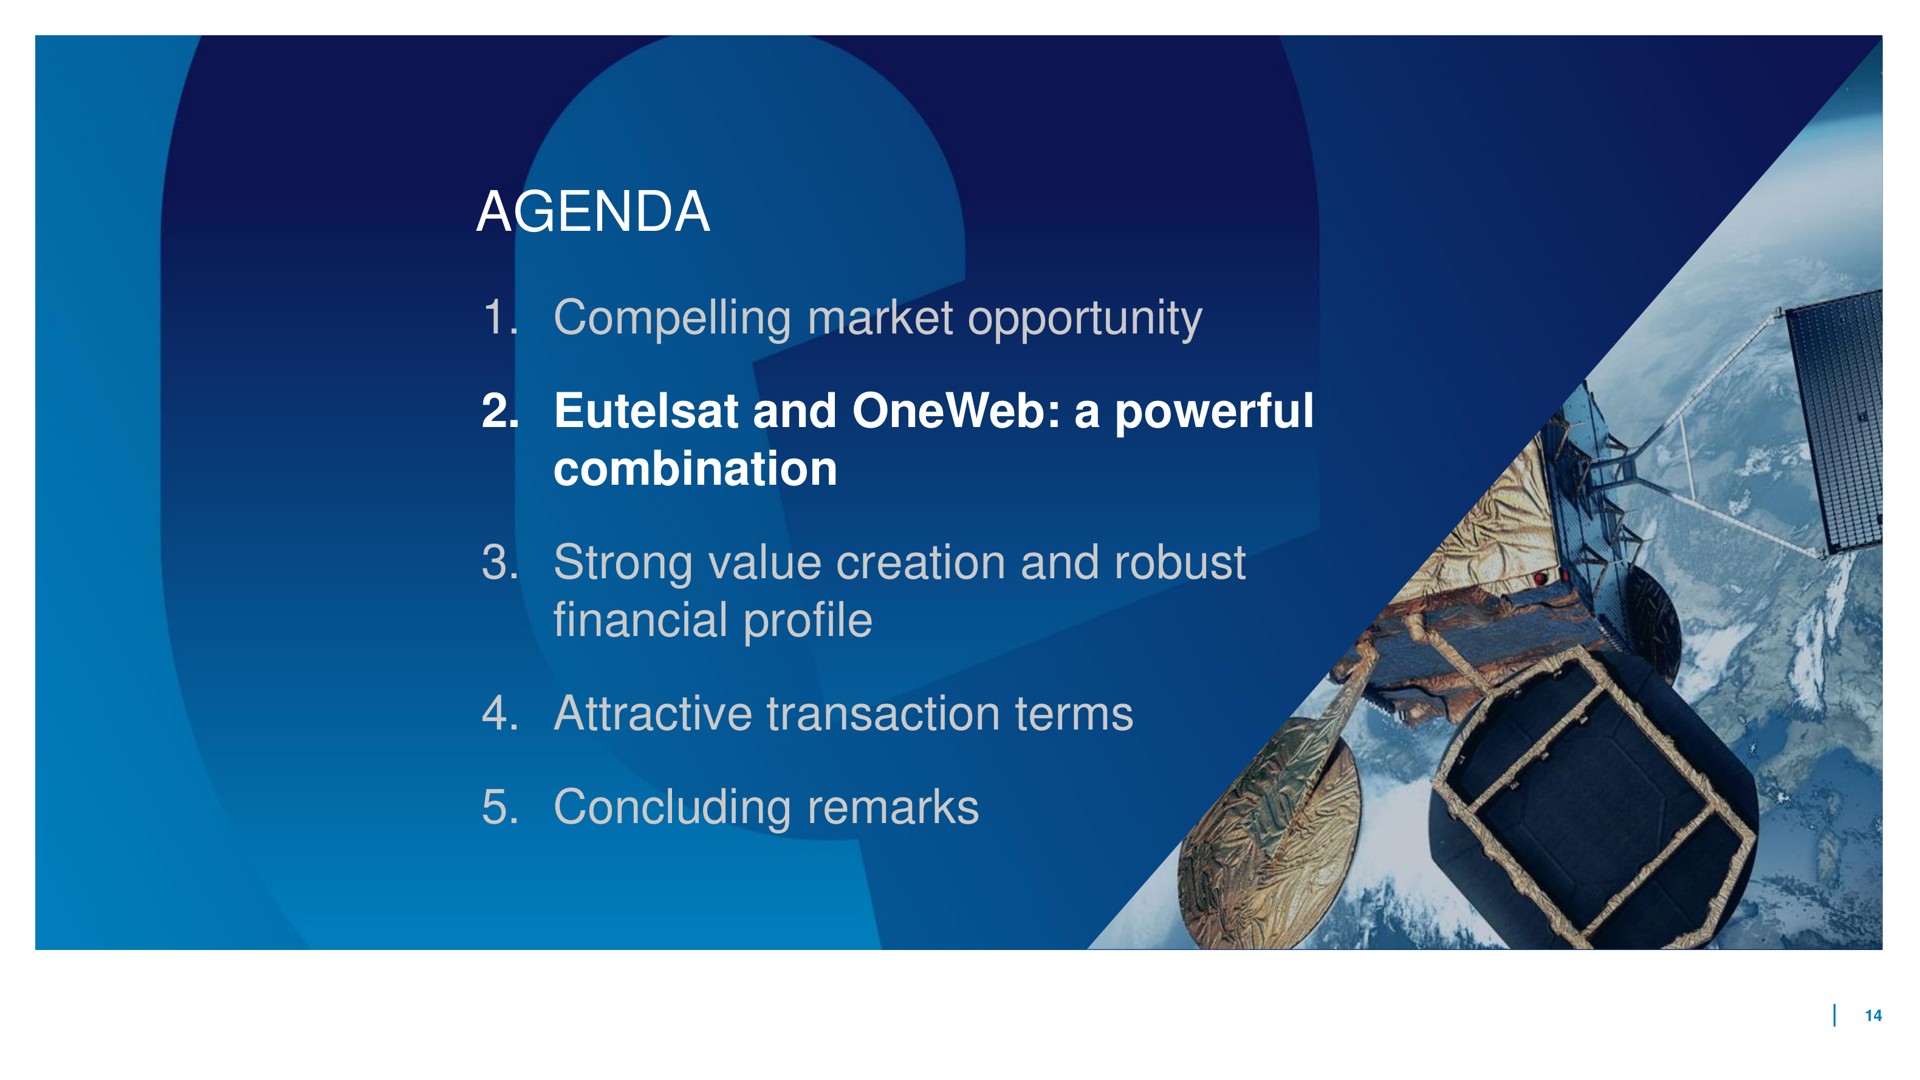 agenda compelling market opportunity and a powerful combination strong value creation and robust financial profile attractive transaction terms concluding remarks | Eutelsat